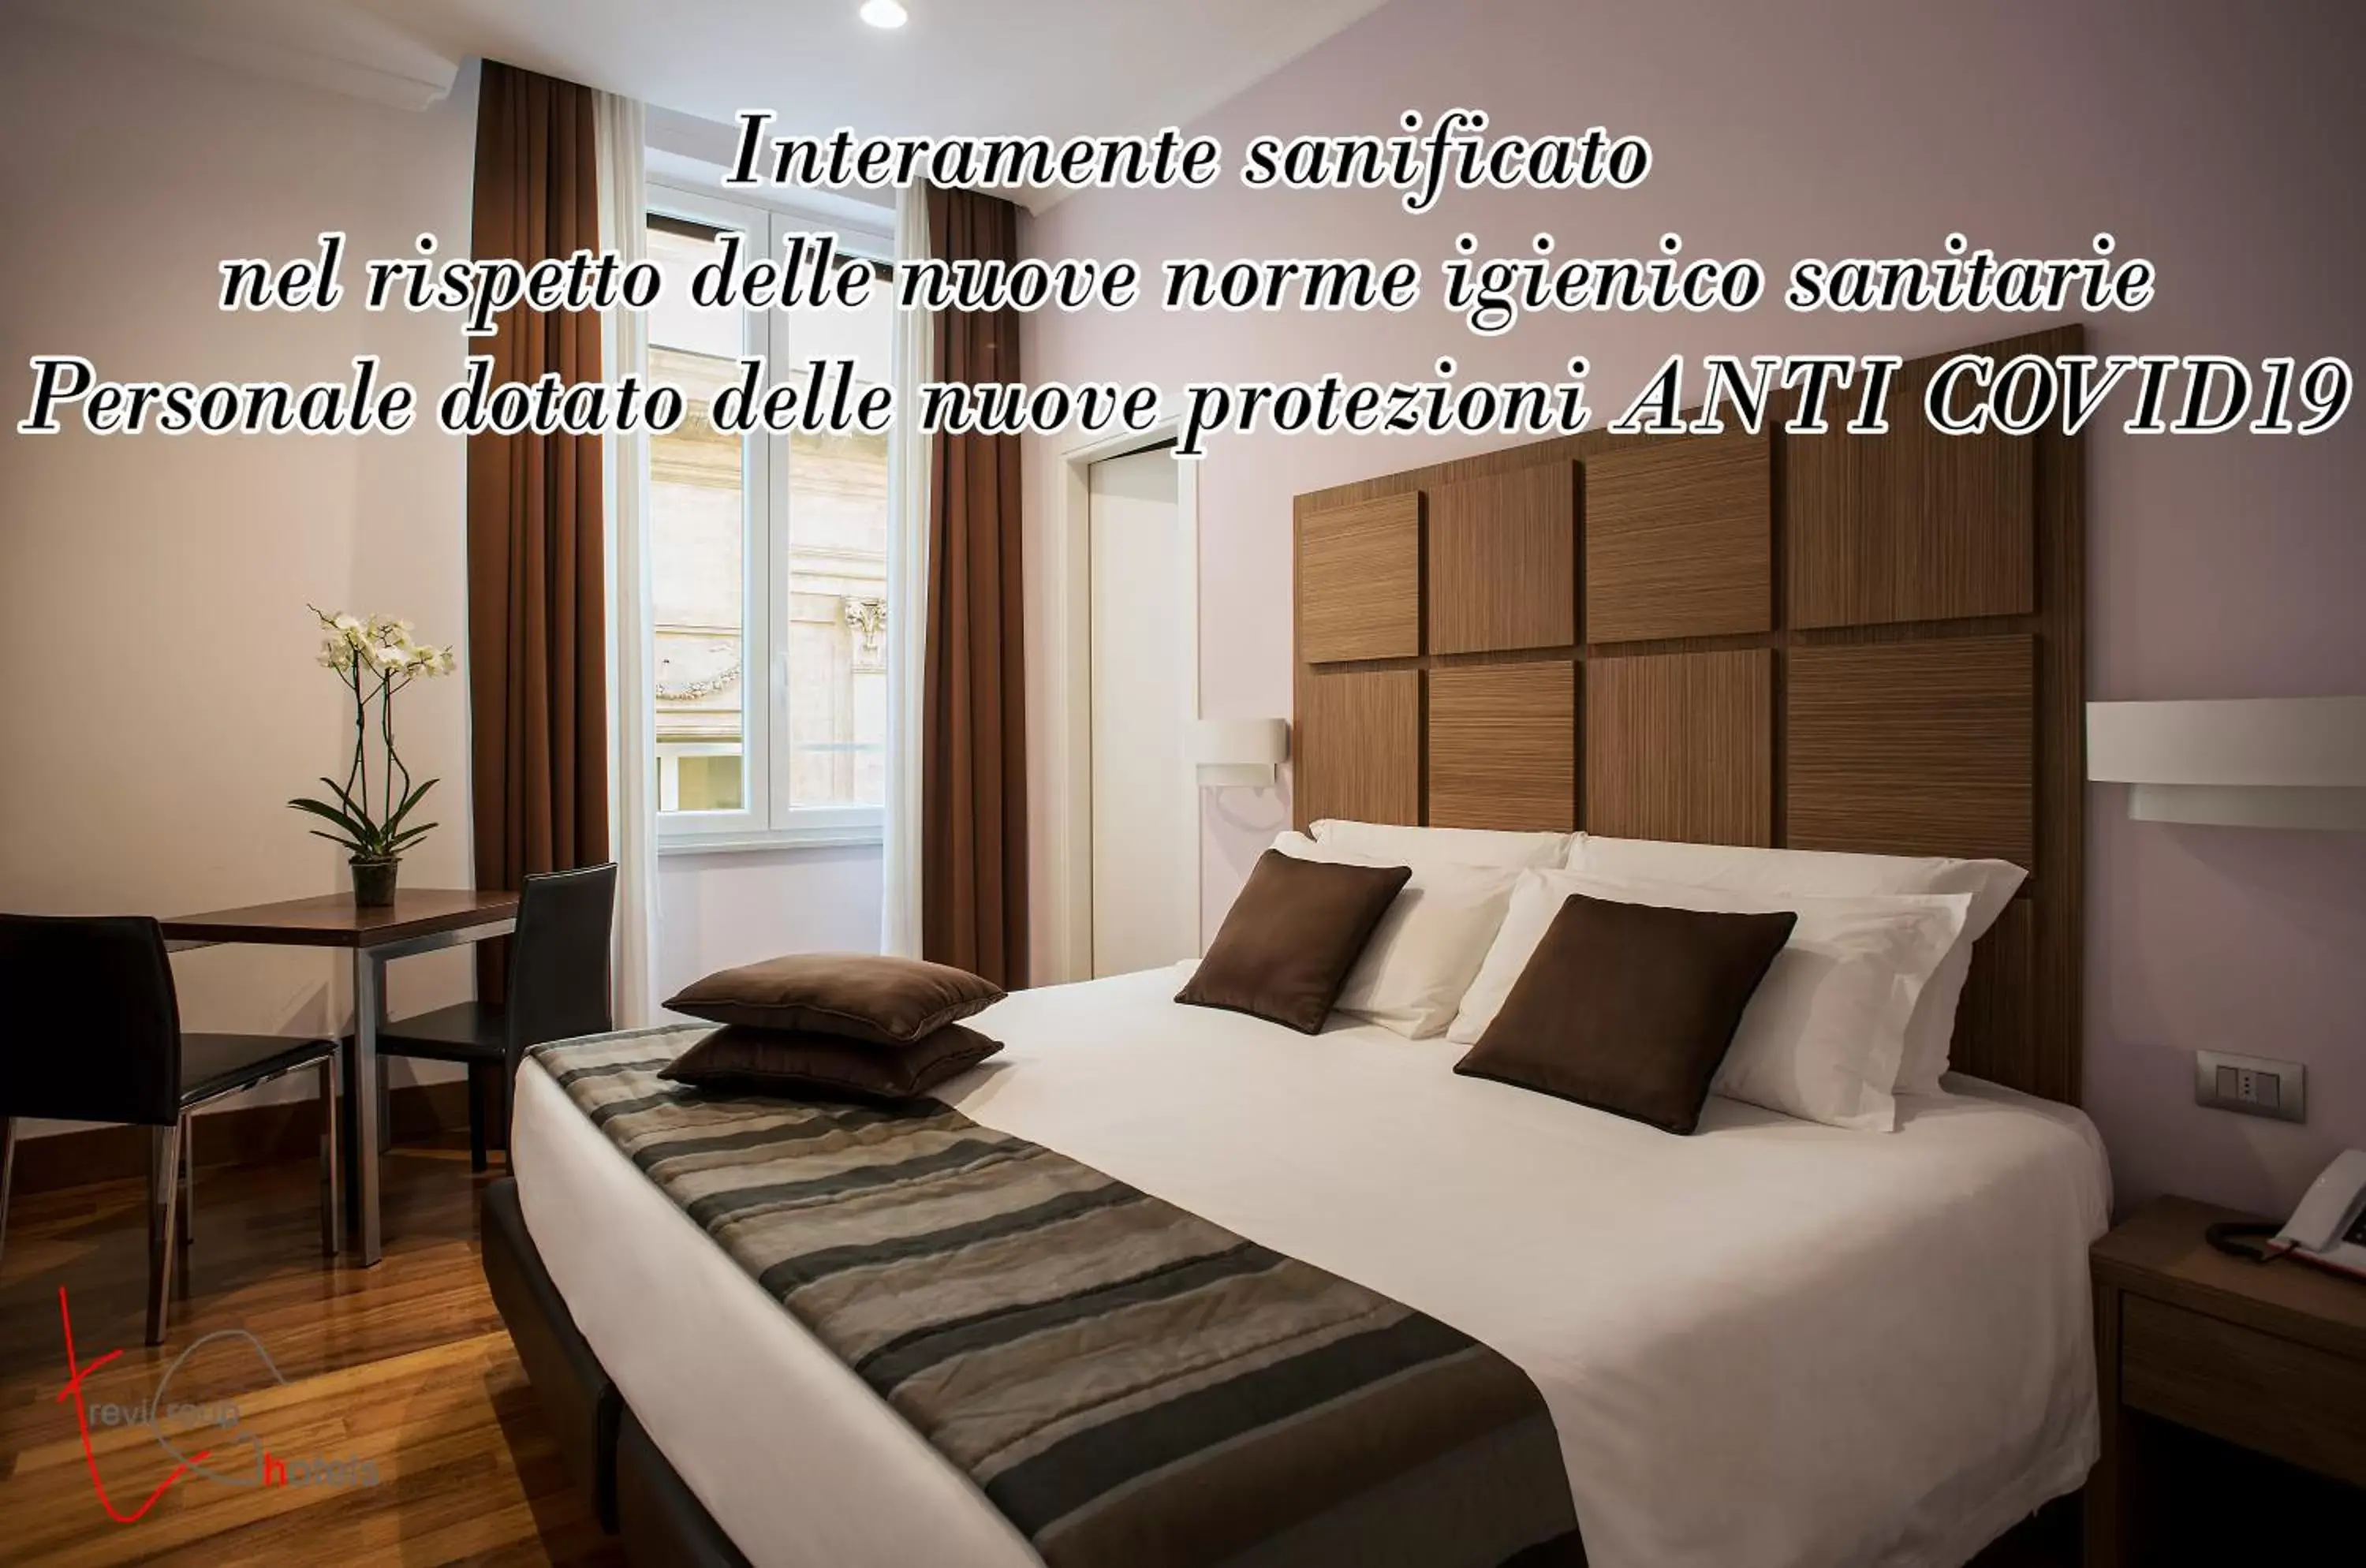 Bed in Rome Art Hotel - Gruppo Trevi Hotels